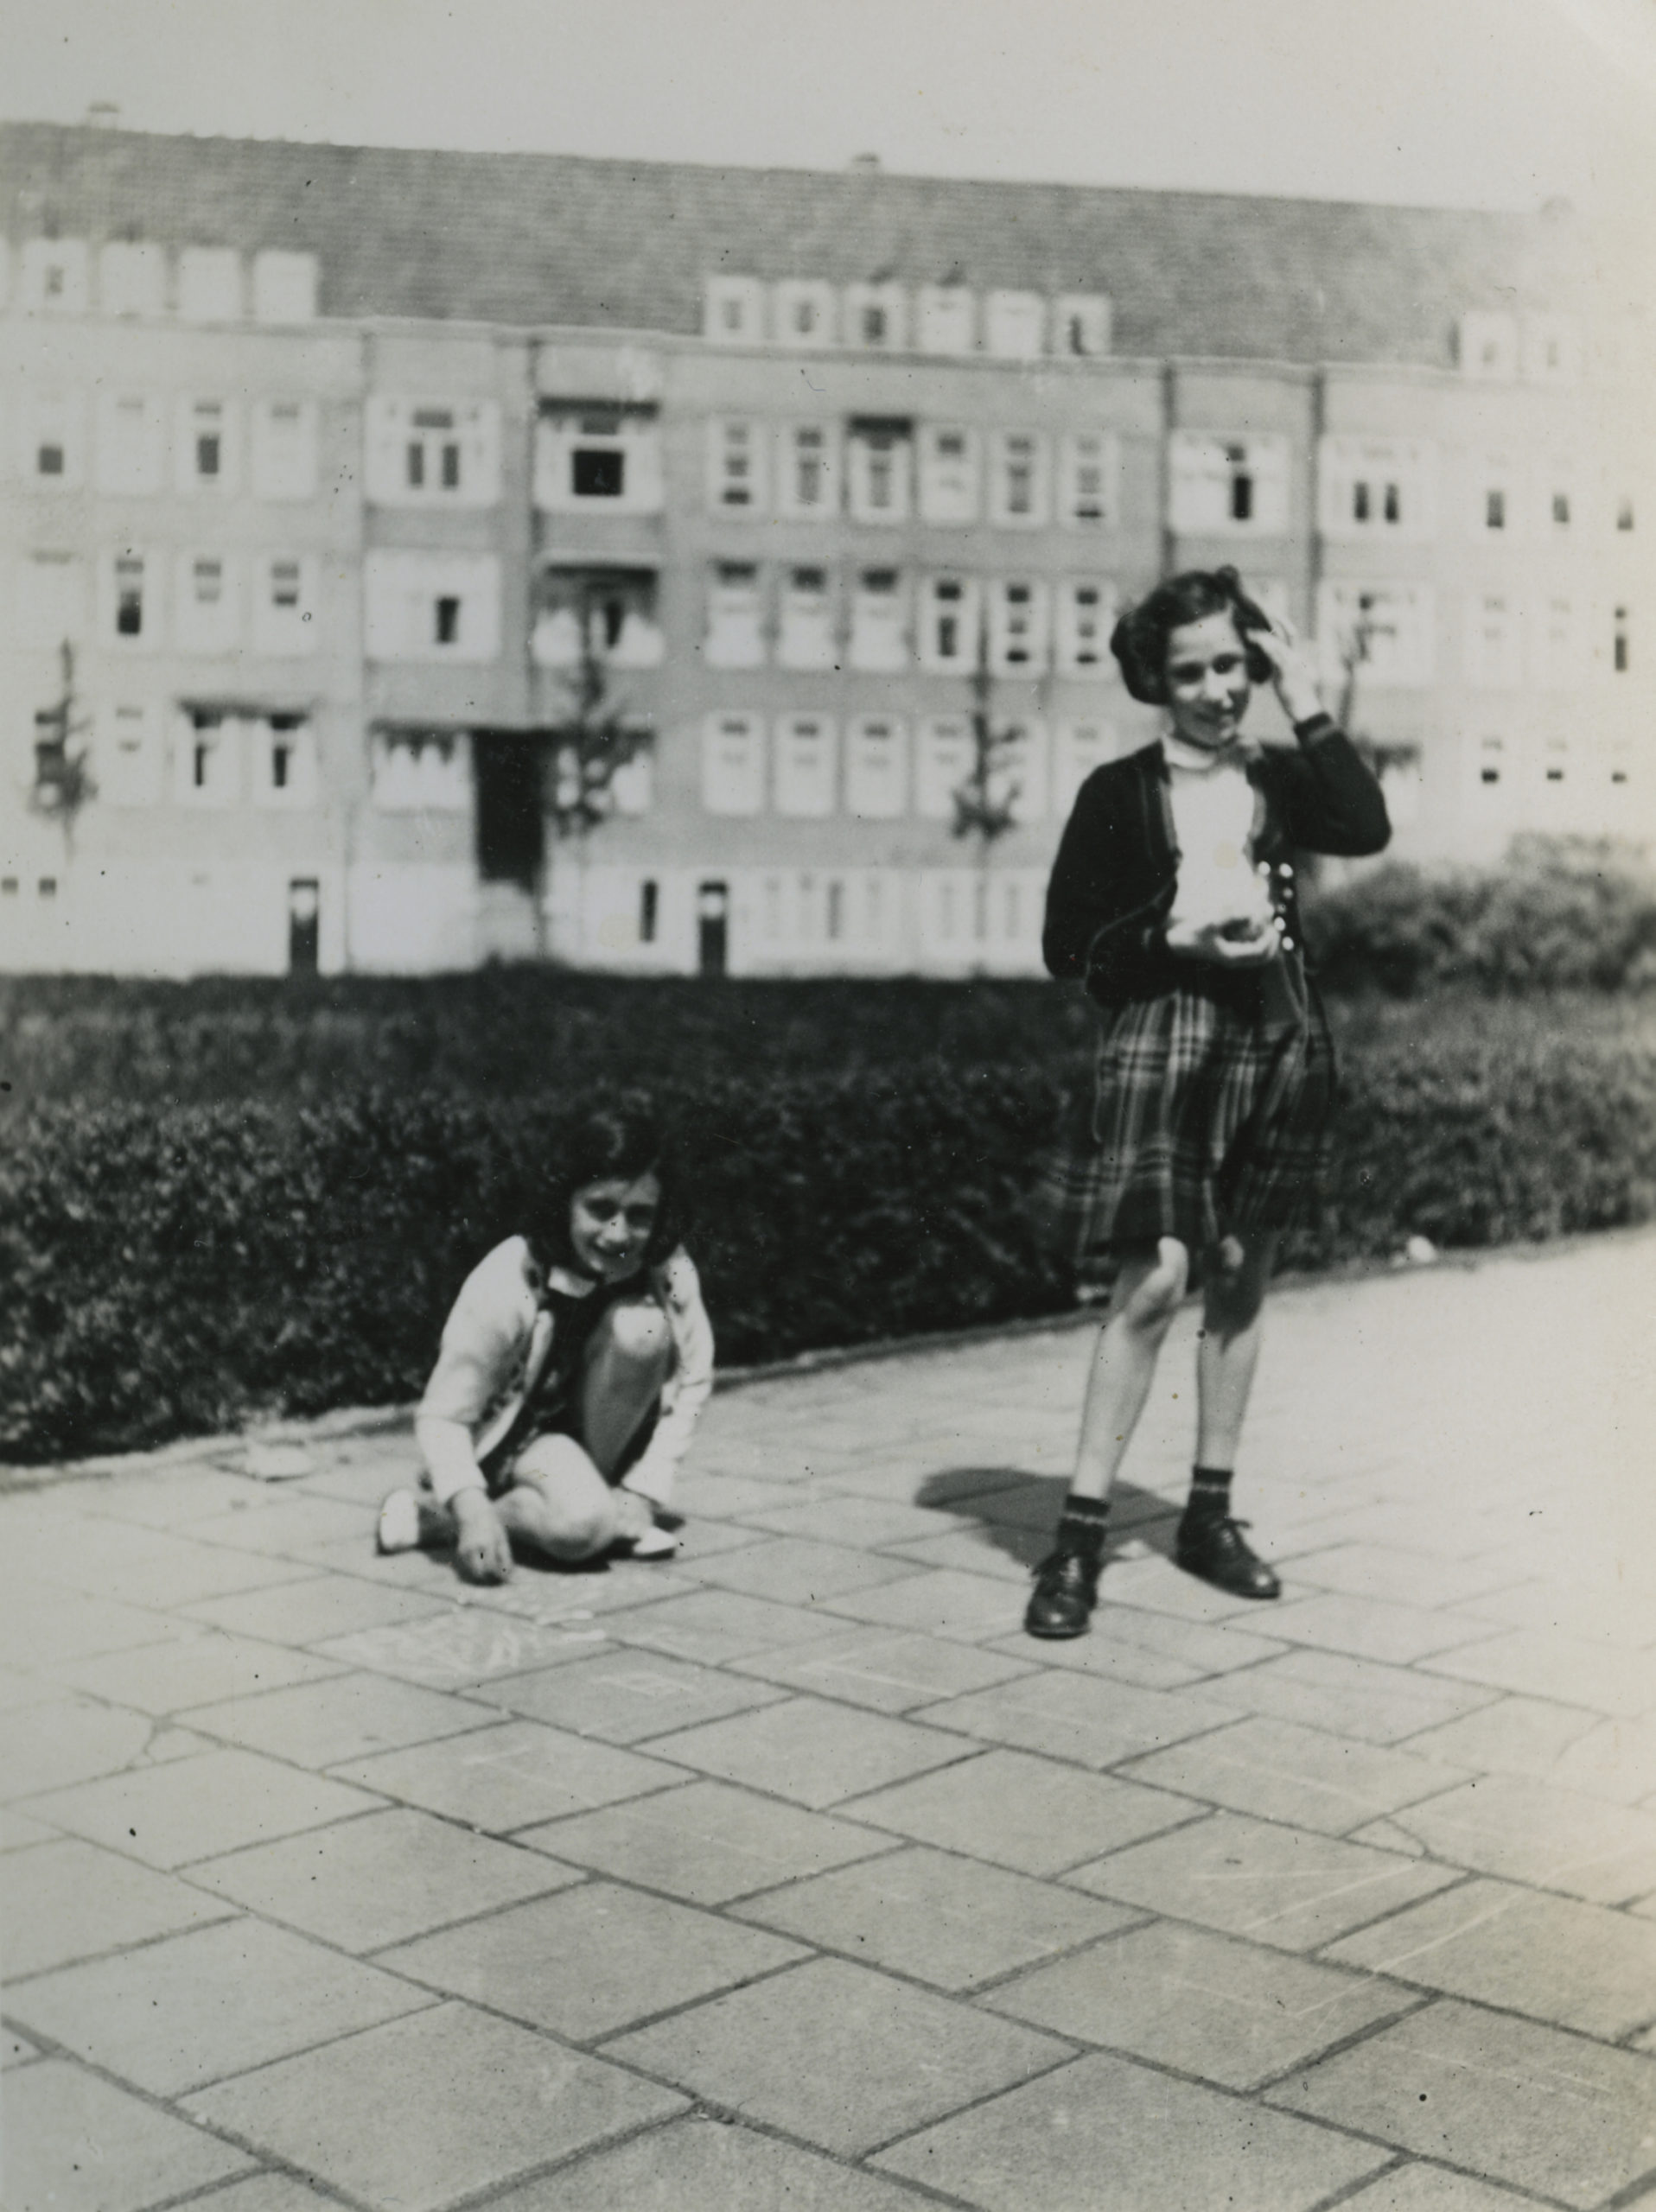 Anne Frank and her friend Hannah Pick- Goslar playing at the Merwedeplein in Amsterdam, May 1940